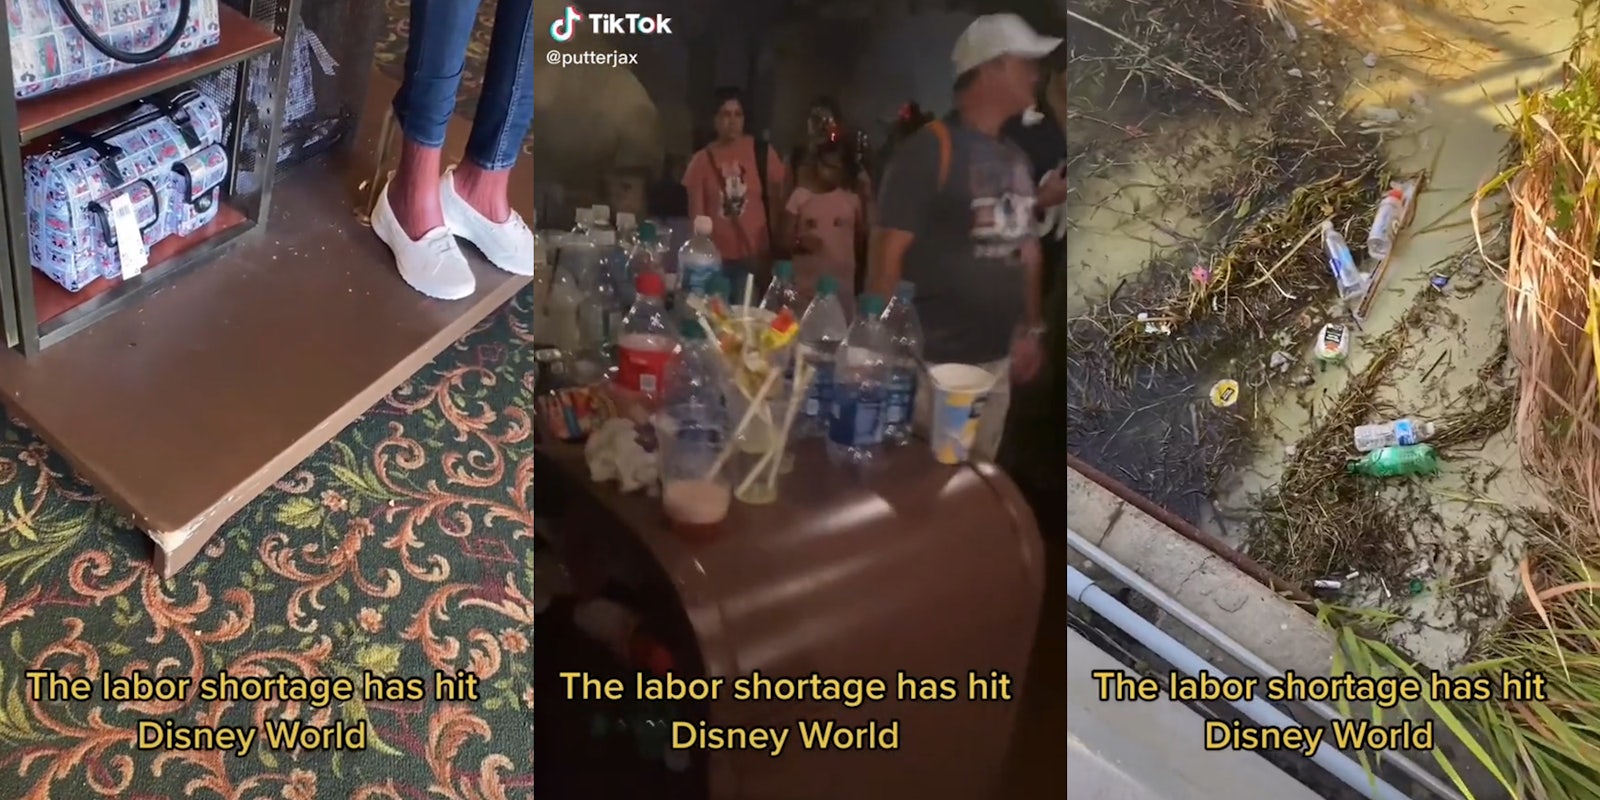 Feet standing on scuffed platform (l) visitors walking past an overflowing garbage can (c) trash on beach (r) all with caption 'The labor shortage has hit Disney World'